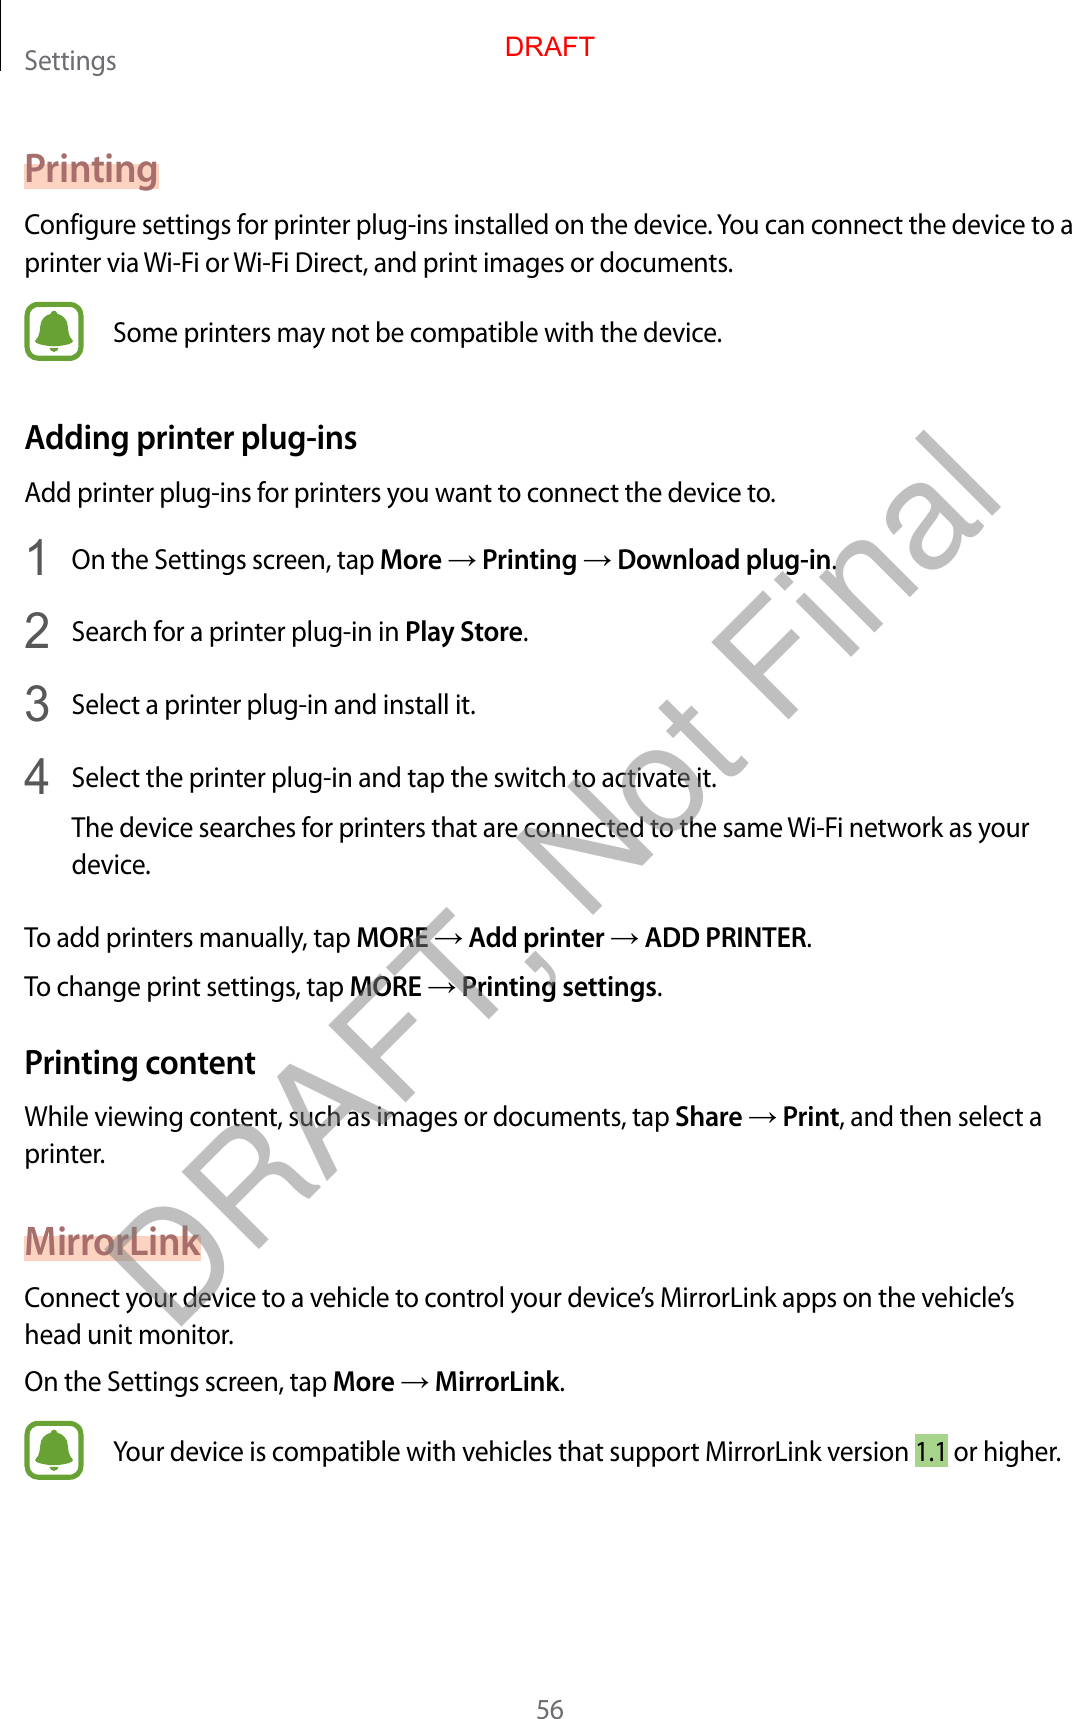 Settings56PrintingConfigure settings for printer plug-ins installed on the device. You can connect the device to a printer via Wi-Fi or Wi-Fi Direct, and print images or documents.Some printers may not be compatible with the device.Adding printer plug-insAdd printer plug-ins for printers you want to connect the device to.1  On the Settings screen, tap More → Printing → Download plug-in.2  Search for a printer plug-in in Play Store.3  Select a printer plug-in and install it.4  Select the printer plug-in and tap the switch to activate it.The device searches for printers that are connected to the same Wi-Fi network as your device.To add printers manually, tap MORE → Add printer → ADD PRINTER.To change print settings, tap MORE → Printing settings.Printing contentWhile viewing content, such as images or documents, tap Share → Print, and then select a printer.MirrorLinkConnect your device to a vehicle to control your device’s MirrorLink apps on the vehicle’s head unit monitor.On the Settings screen, tap More → MirrorLink.Your device is compatible with vehicles that support MirrorLink version 1.1 or higher.DRAFTDRAFT, Not Final